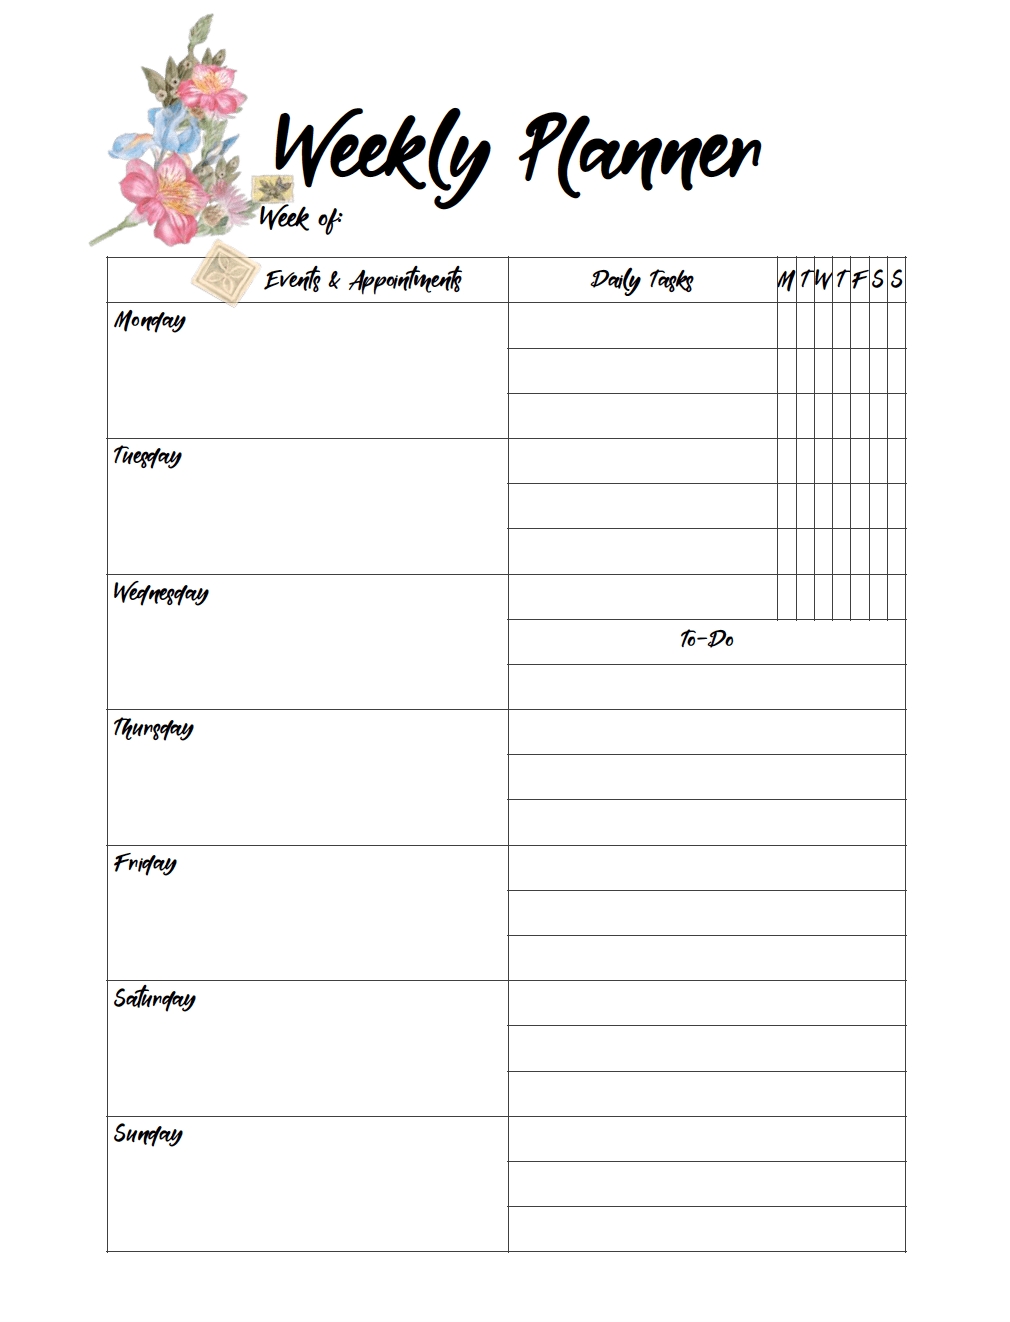 Free Printable Weekly Planners: Monday Start intended for Weekly Monday Through Friday Appointment